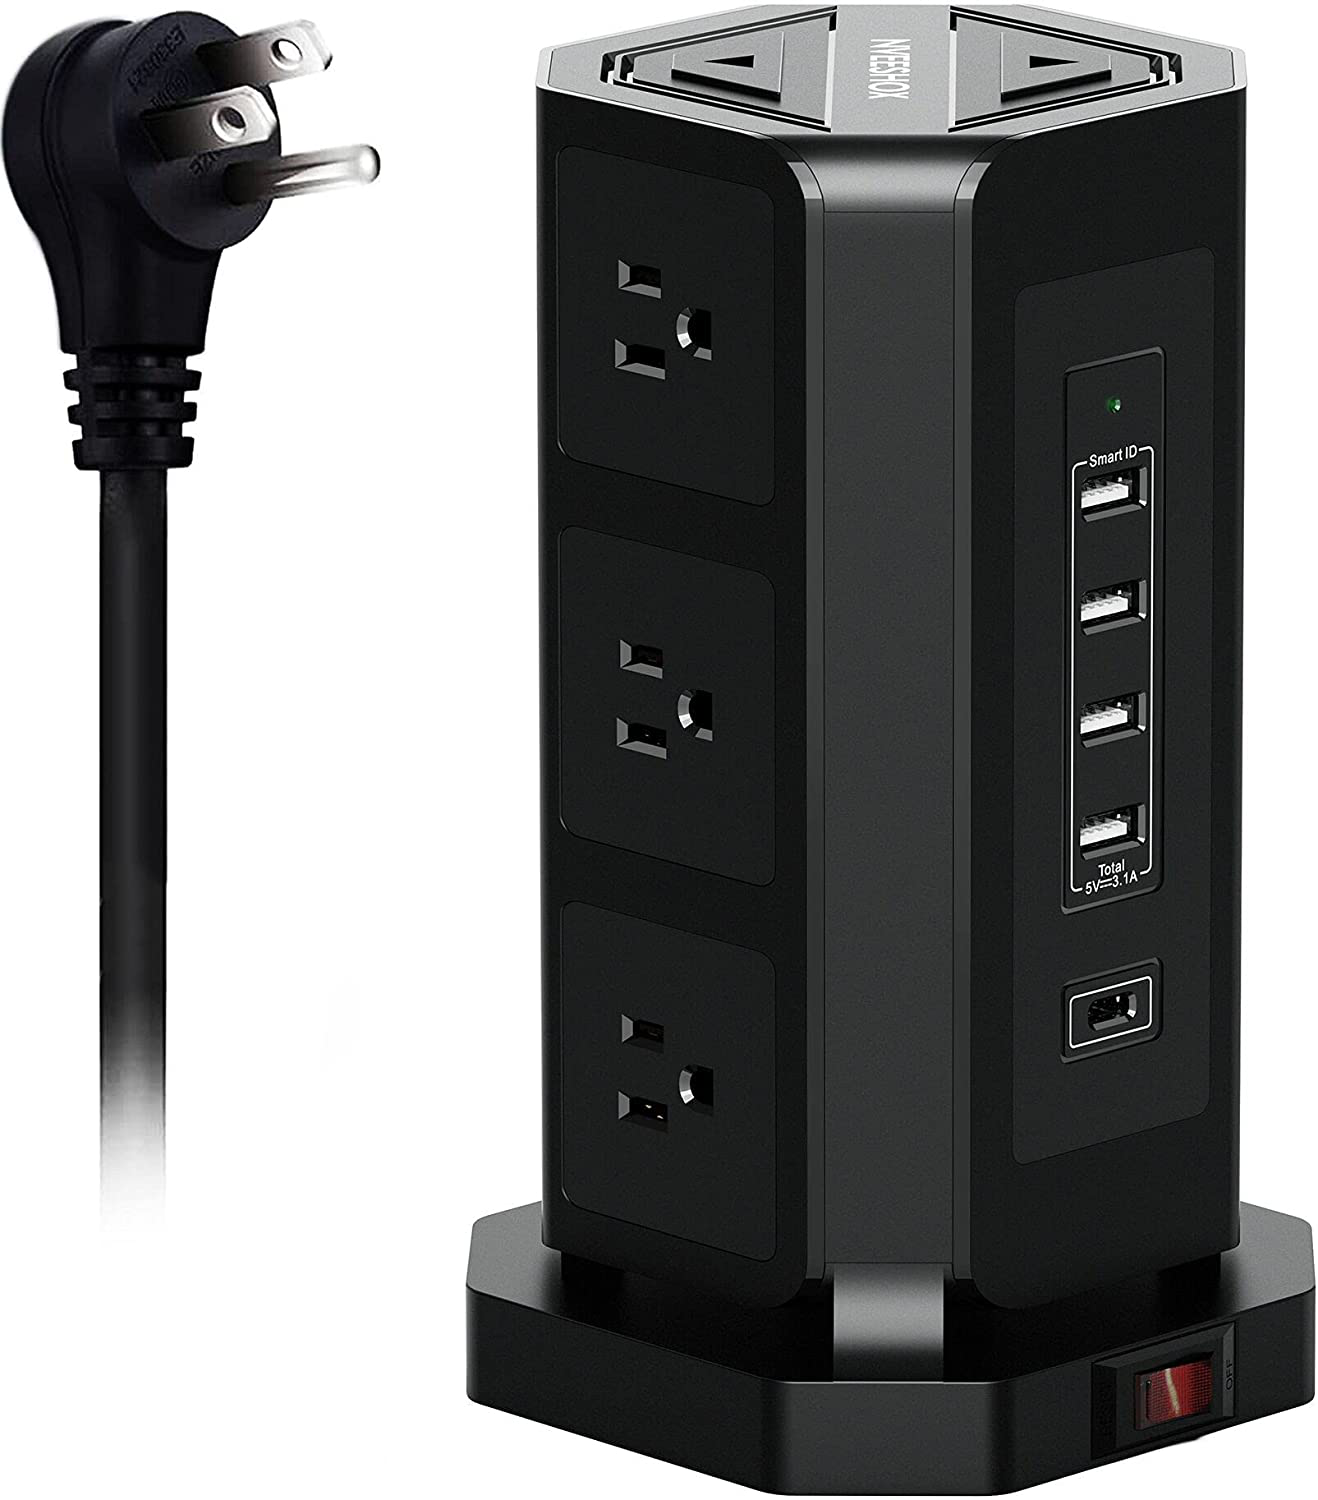 NVEESHOX Surge Protector Power Strip Tower with 12 Outlets 4 USB Ports, 10Ft Long Extension Cord Power Strips Desk Powerstrip Charging Tower, Overload Protection Fire Proof for Home Office Dorm-Black Animals & Pet Supplies > Pet Supplies > Dog Supplies > Dog Treadmills NVEESHOX 9 AC+4U1C+Black  